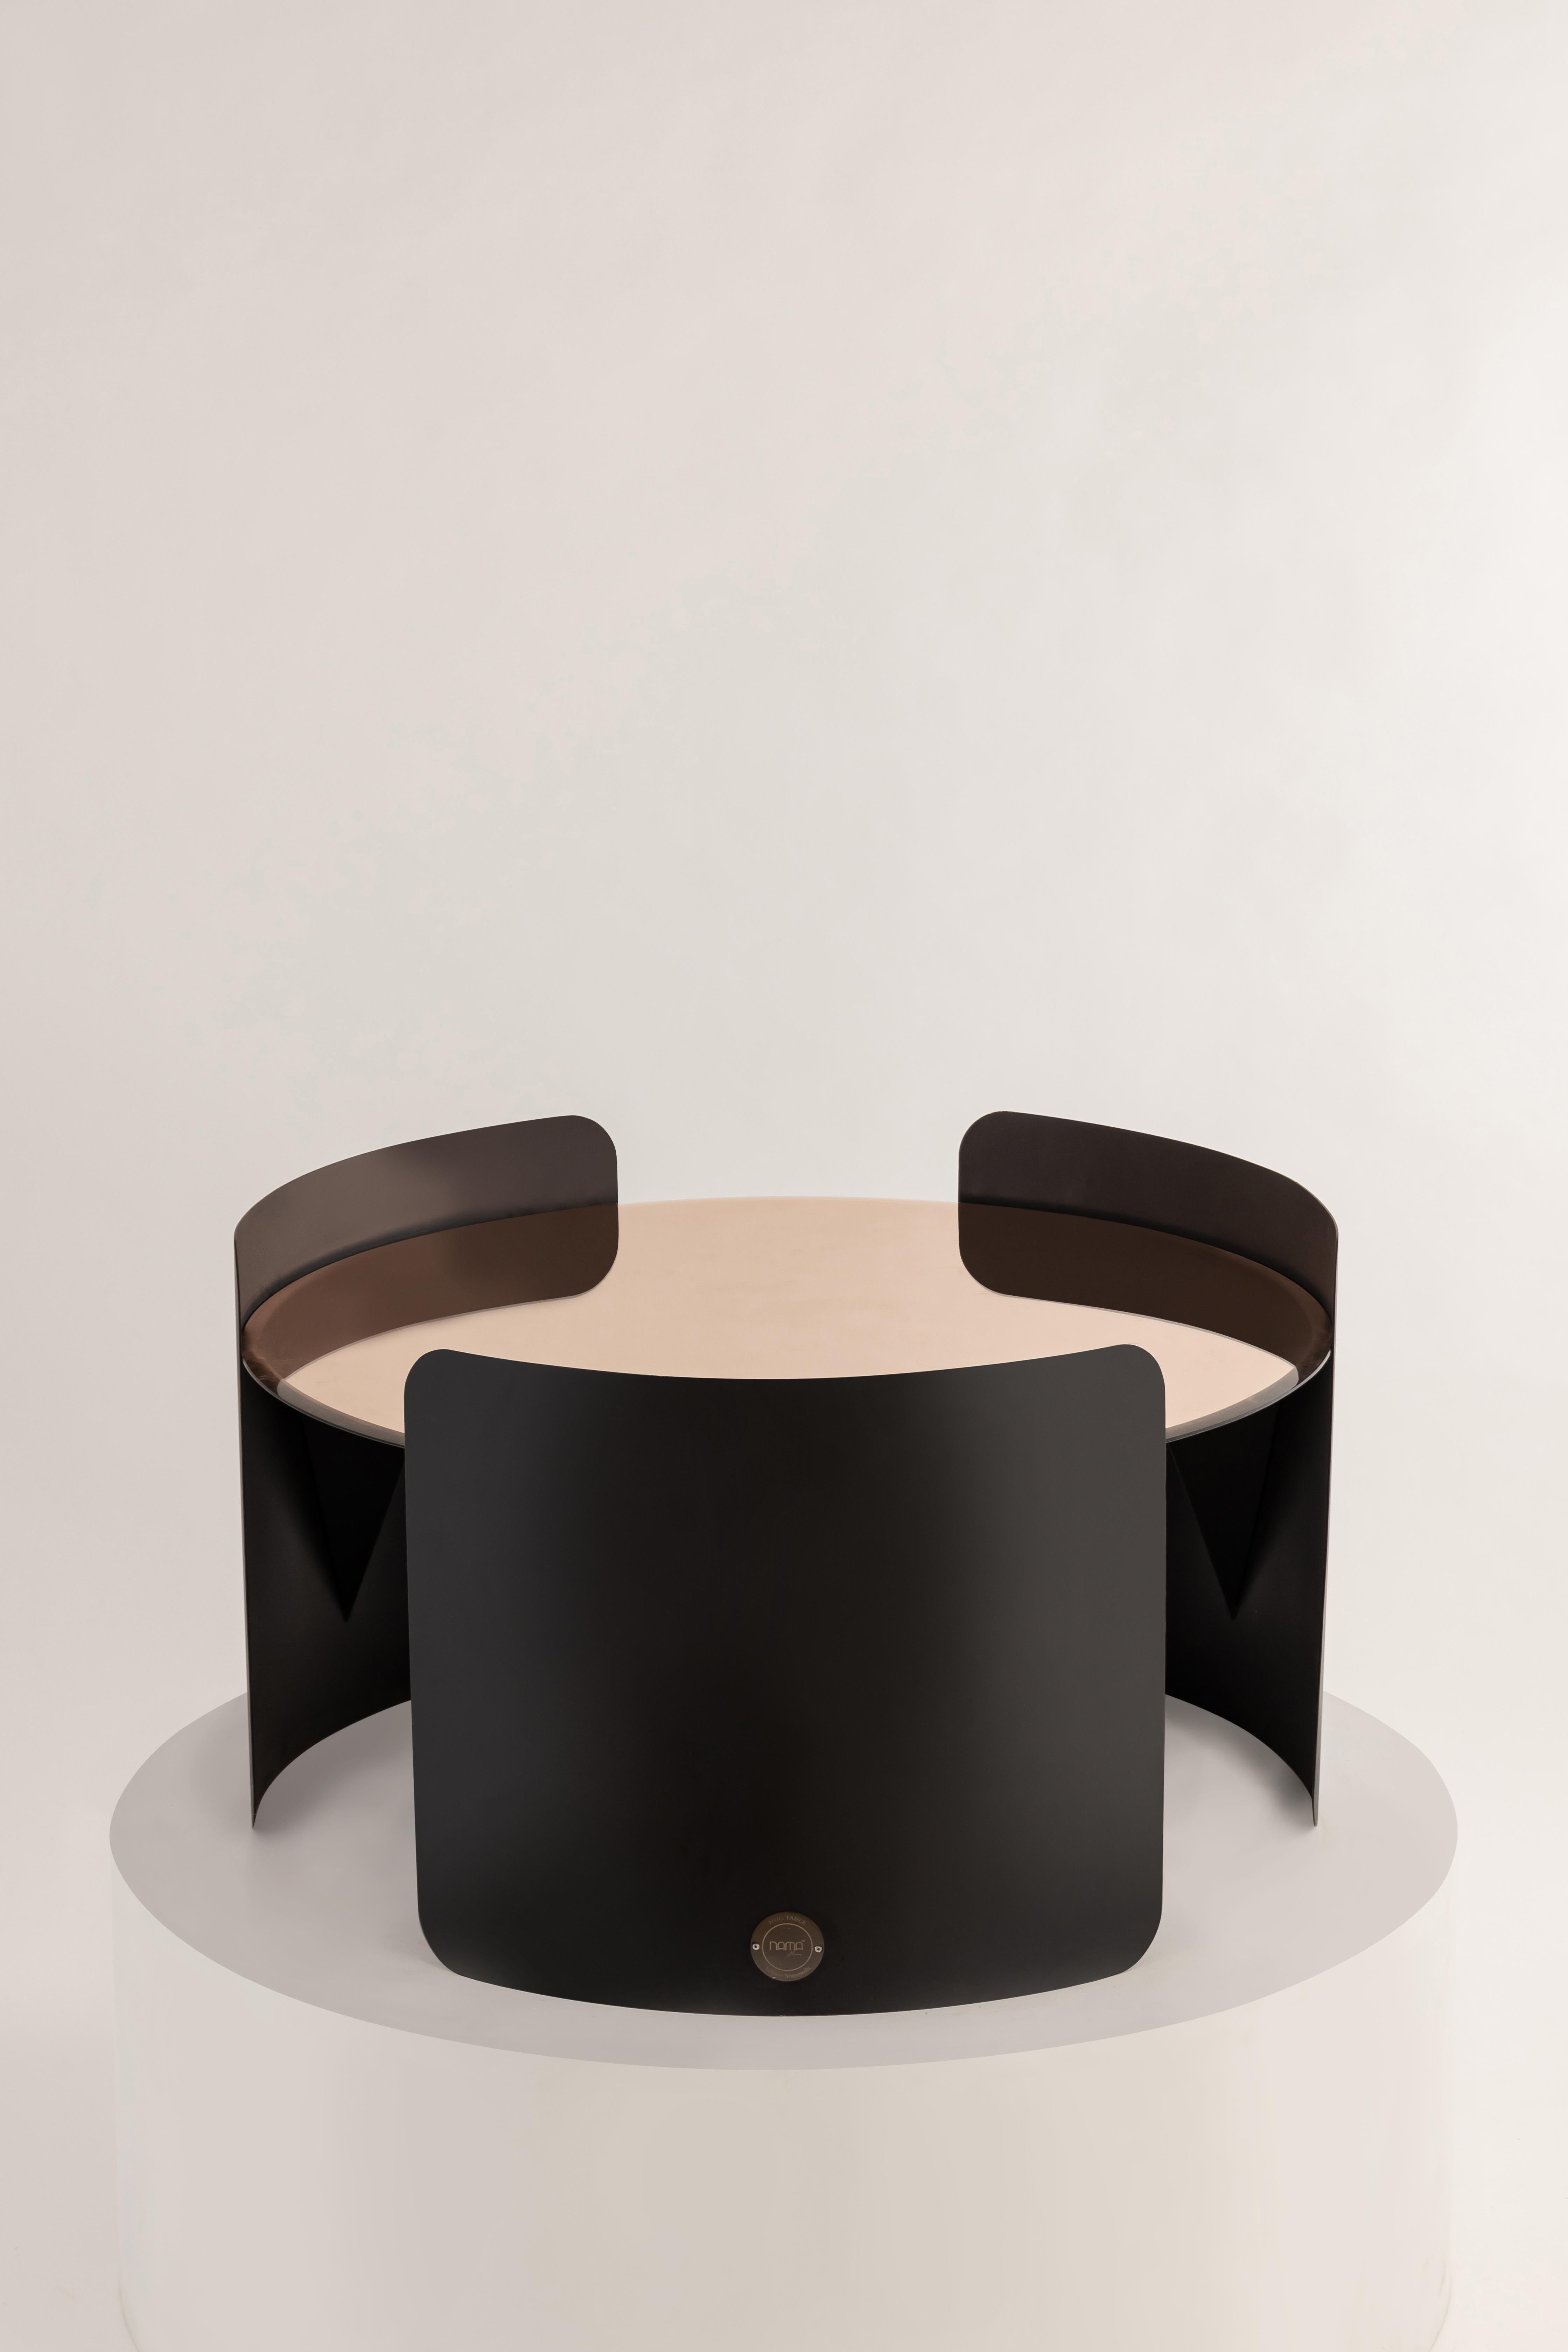 Your day just got cozier with the Hug Coffee Table. Finely crafted without a single harsh edge, this table is an embodiment of affection and elegance.

The circular top is gracefully enveloped by three metal sheets, curving around it like a loving